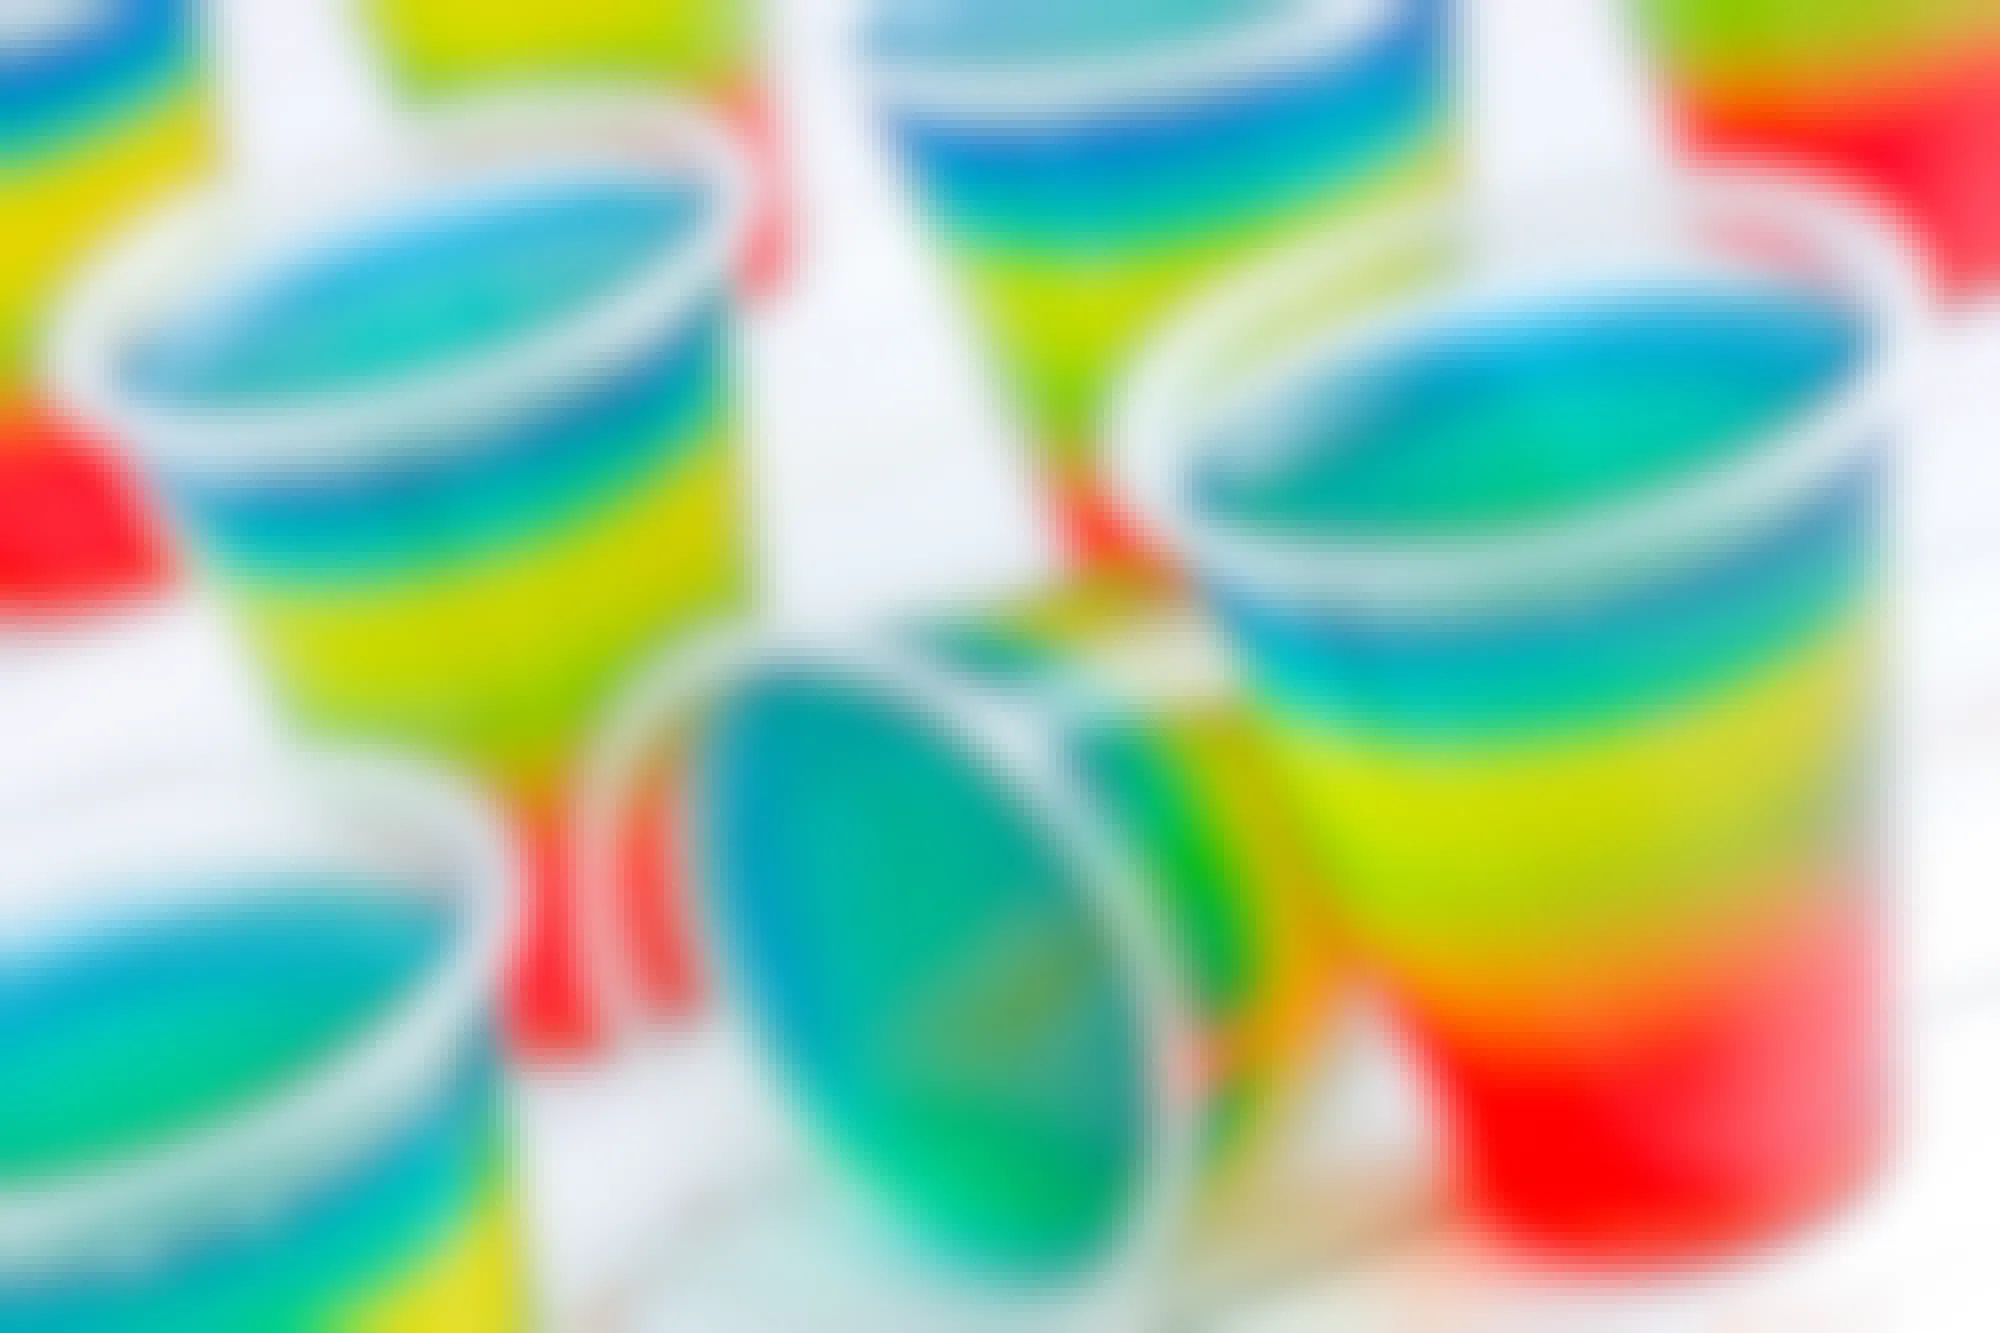 Cups with a rainbow of colorful Jell-O in them